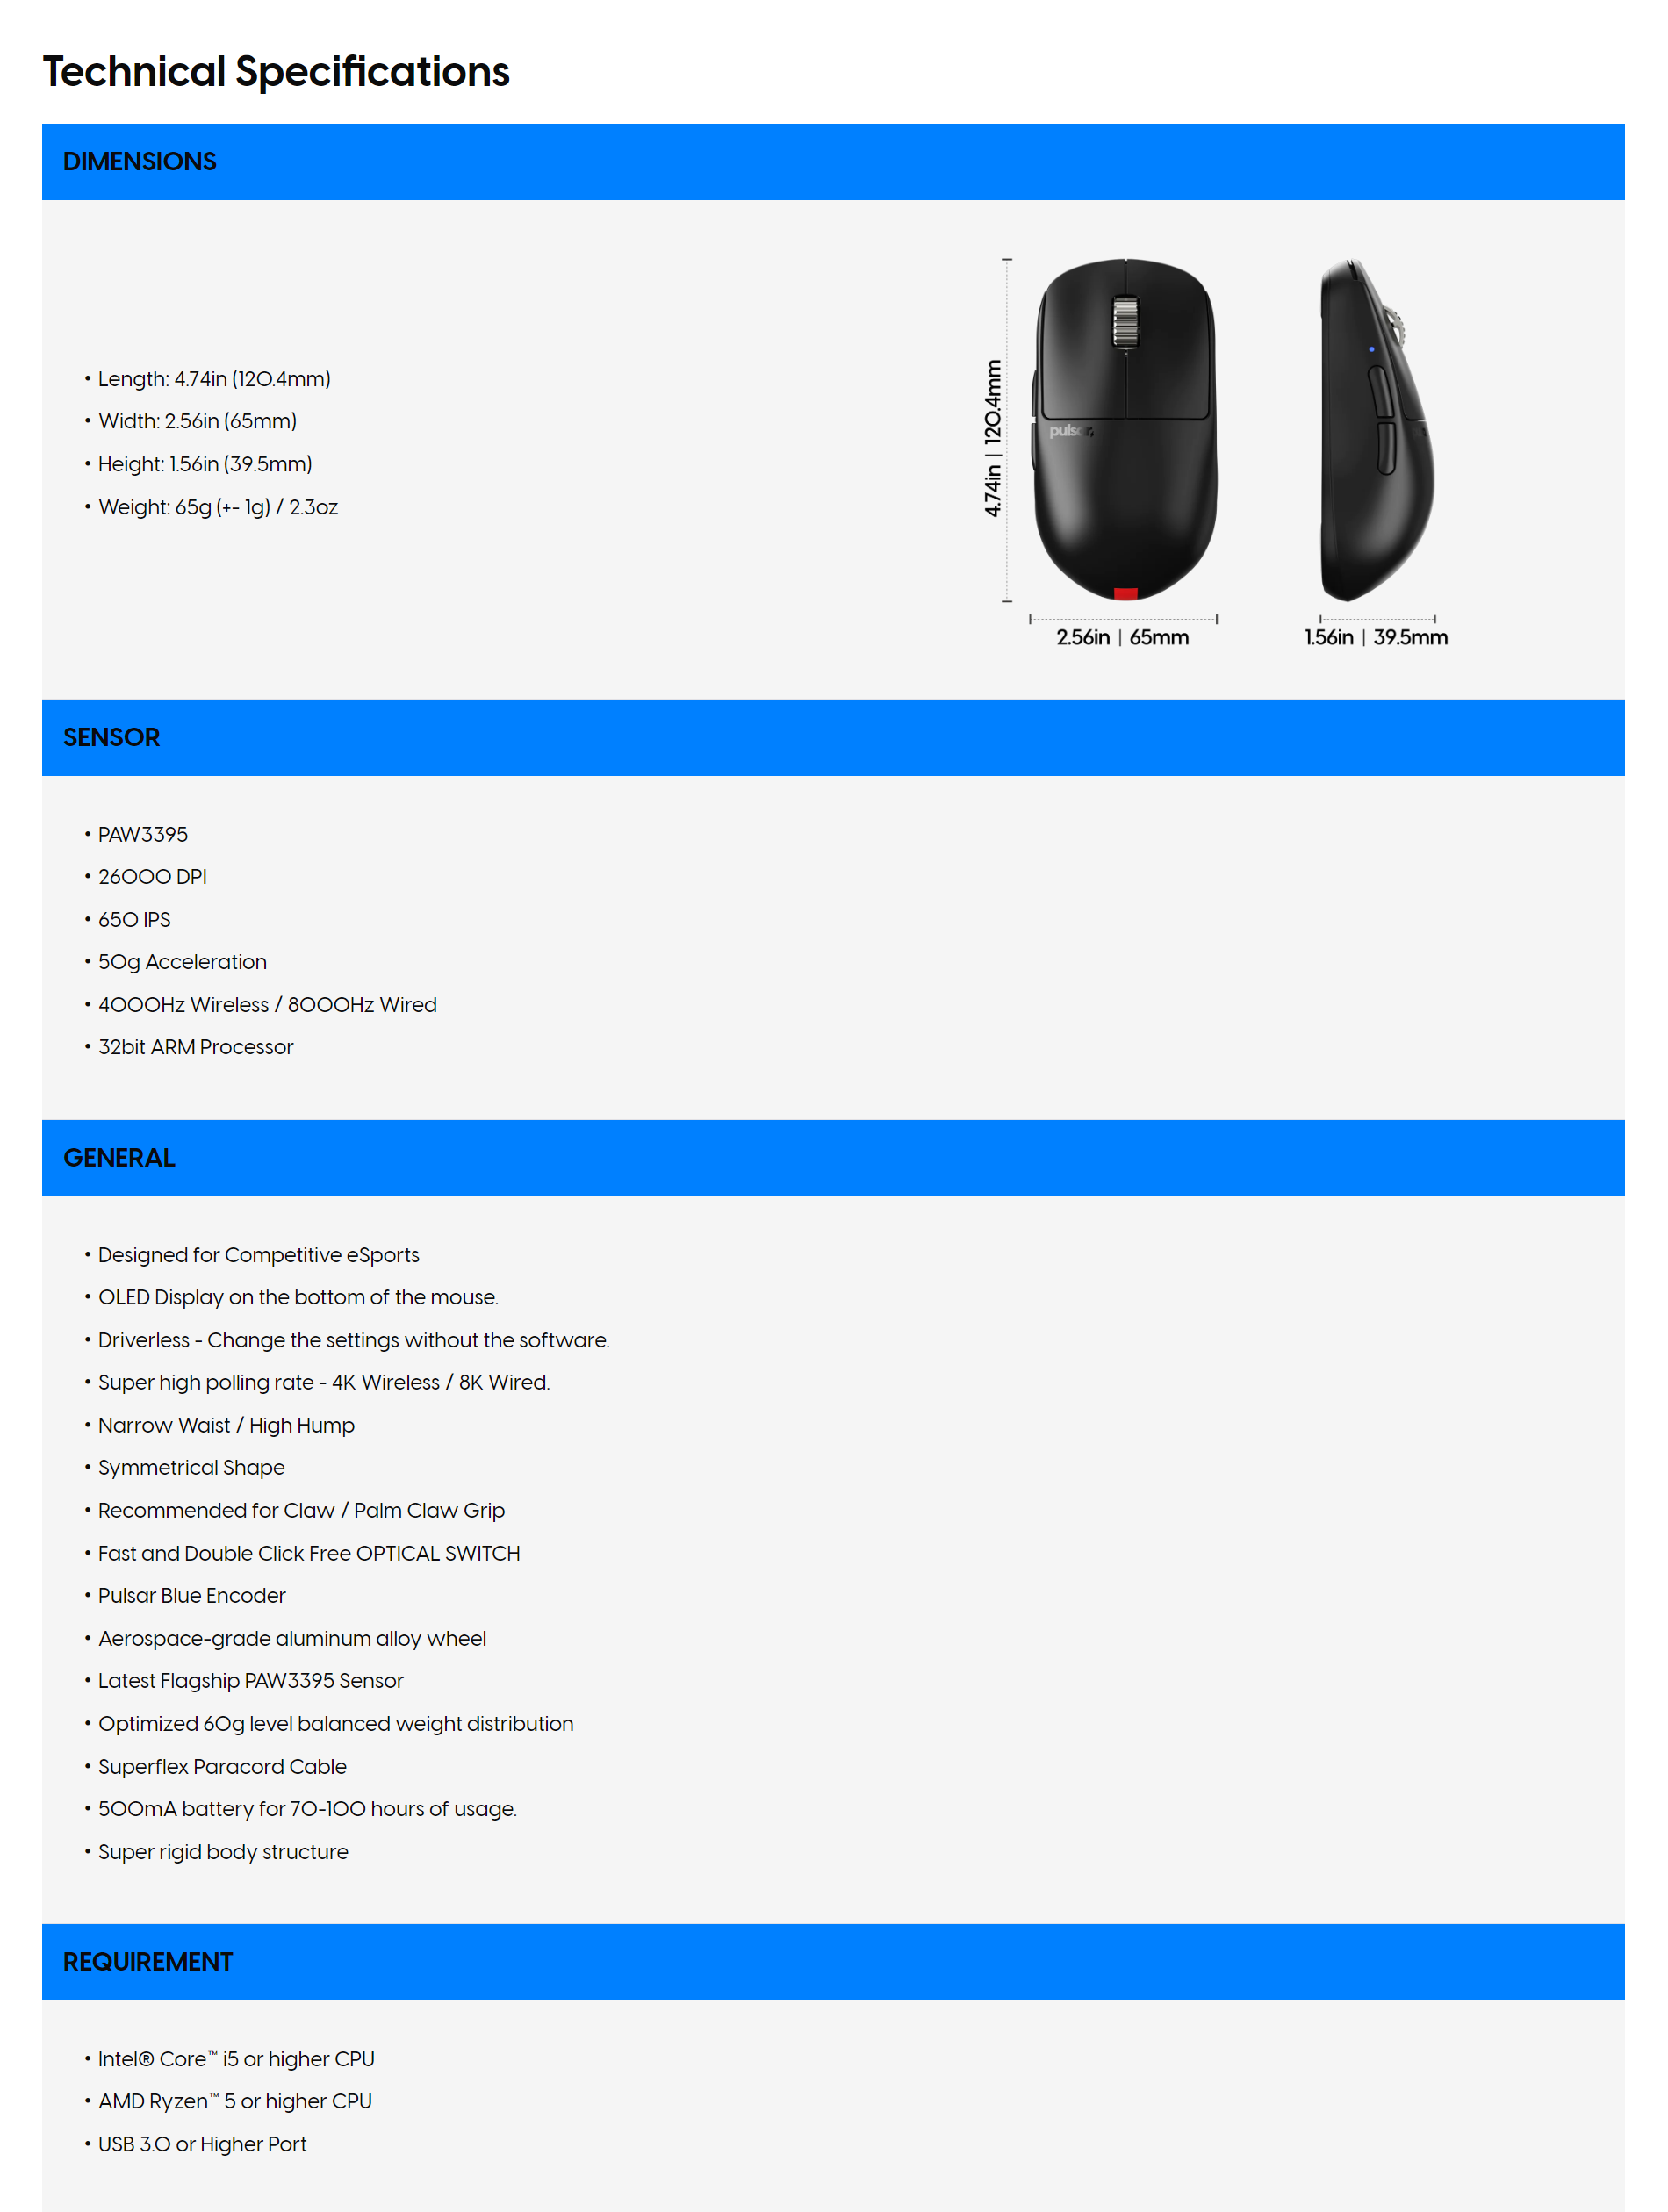 A large marketing image providing additional information about the product Pulsar X2H eS Wireless Gaming Mouse - Black - Additional alt info not provided